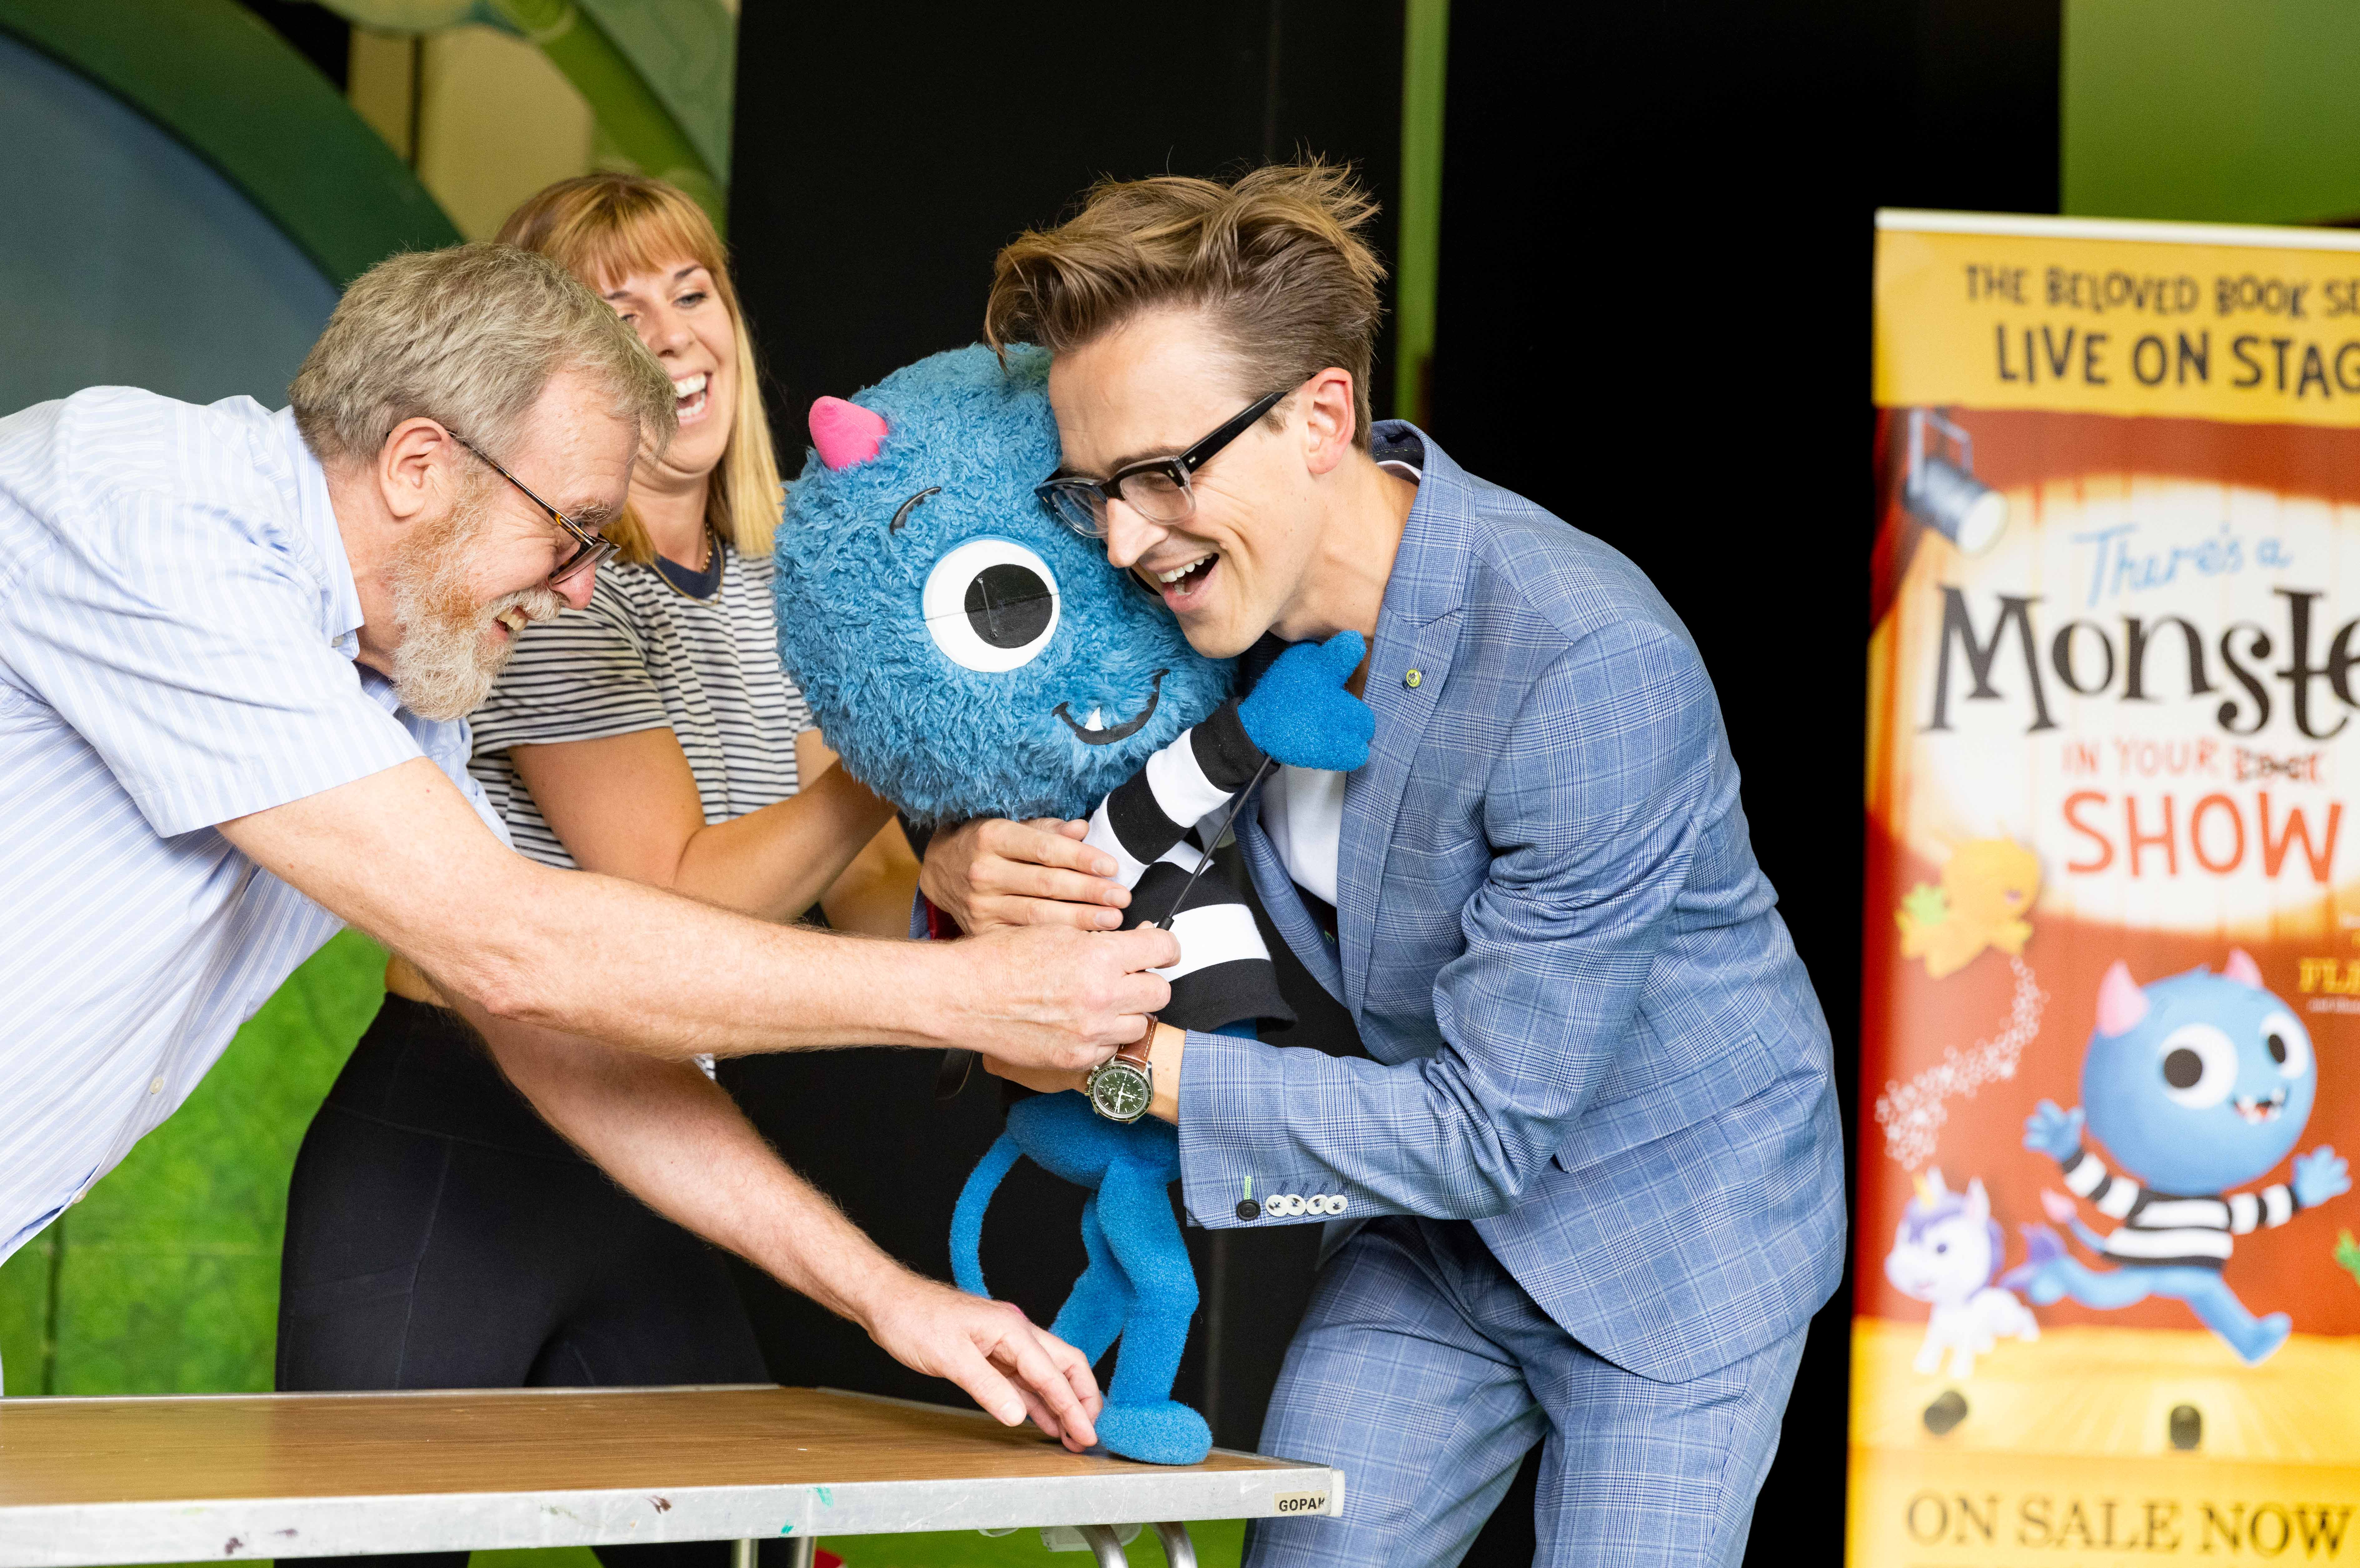 Tom Fletcher embraces a puppet from There's a Monster in Your Show